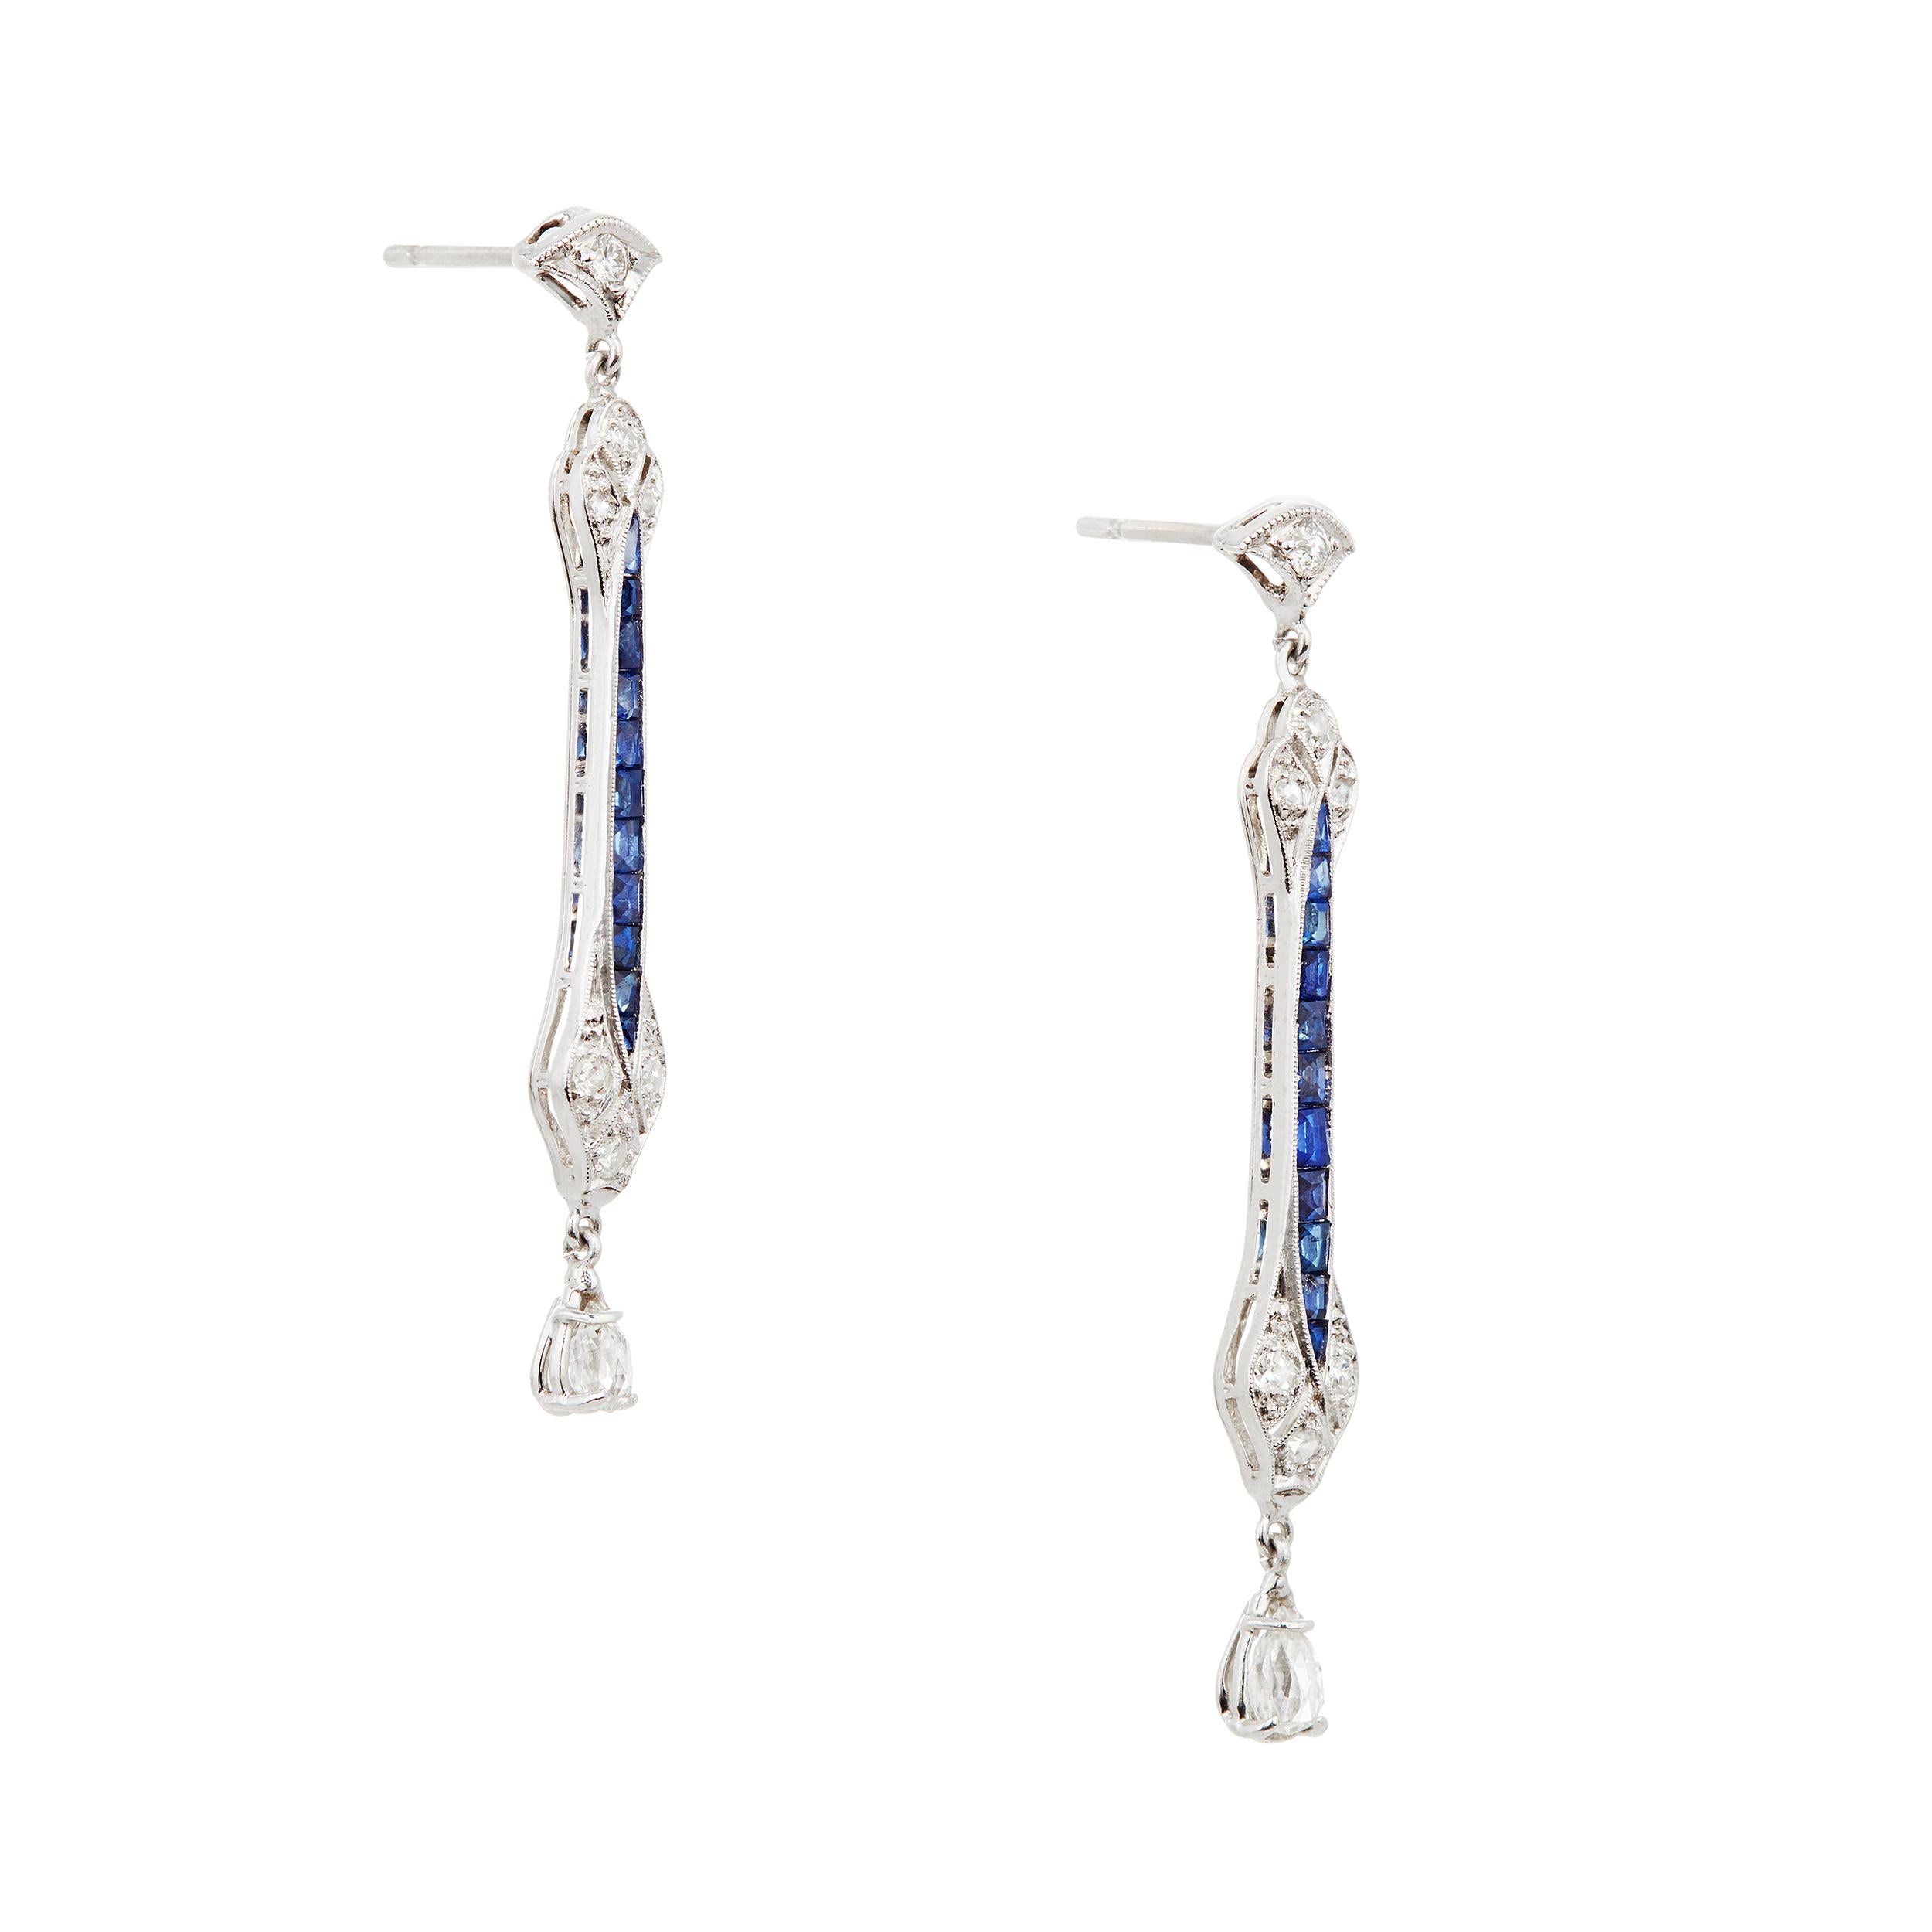 Kiersten Elizabeth's favorite era is the lively, fun, and stylish Art Deco period. Part of what she likes most is how Deco Design are still modern and versatile.

Kiersten Elizabeth discovered these vintage earrings as a perfect compliment to the